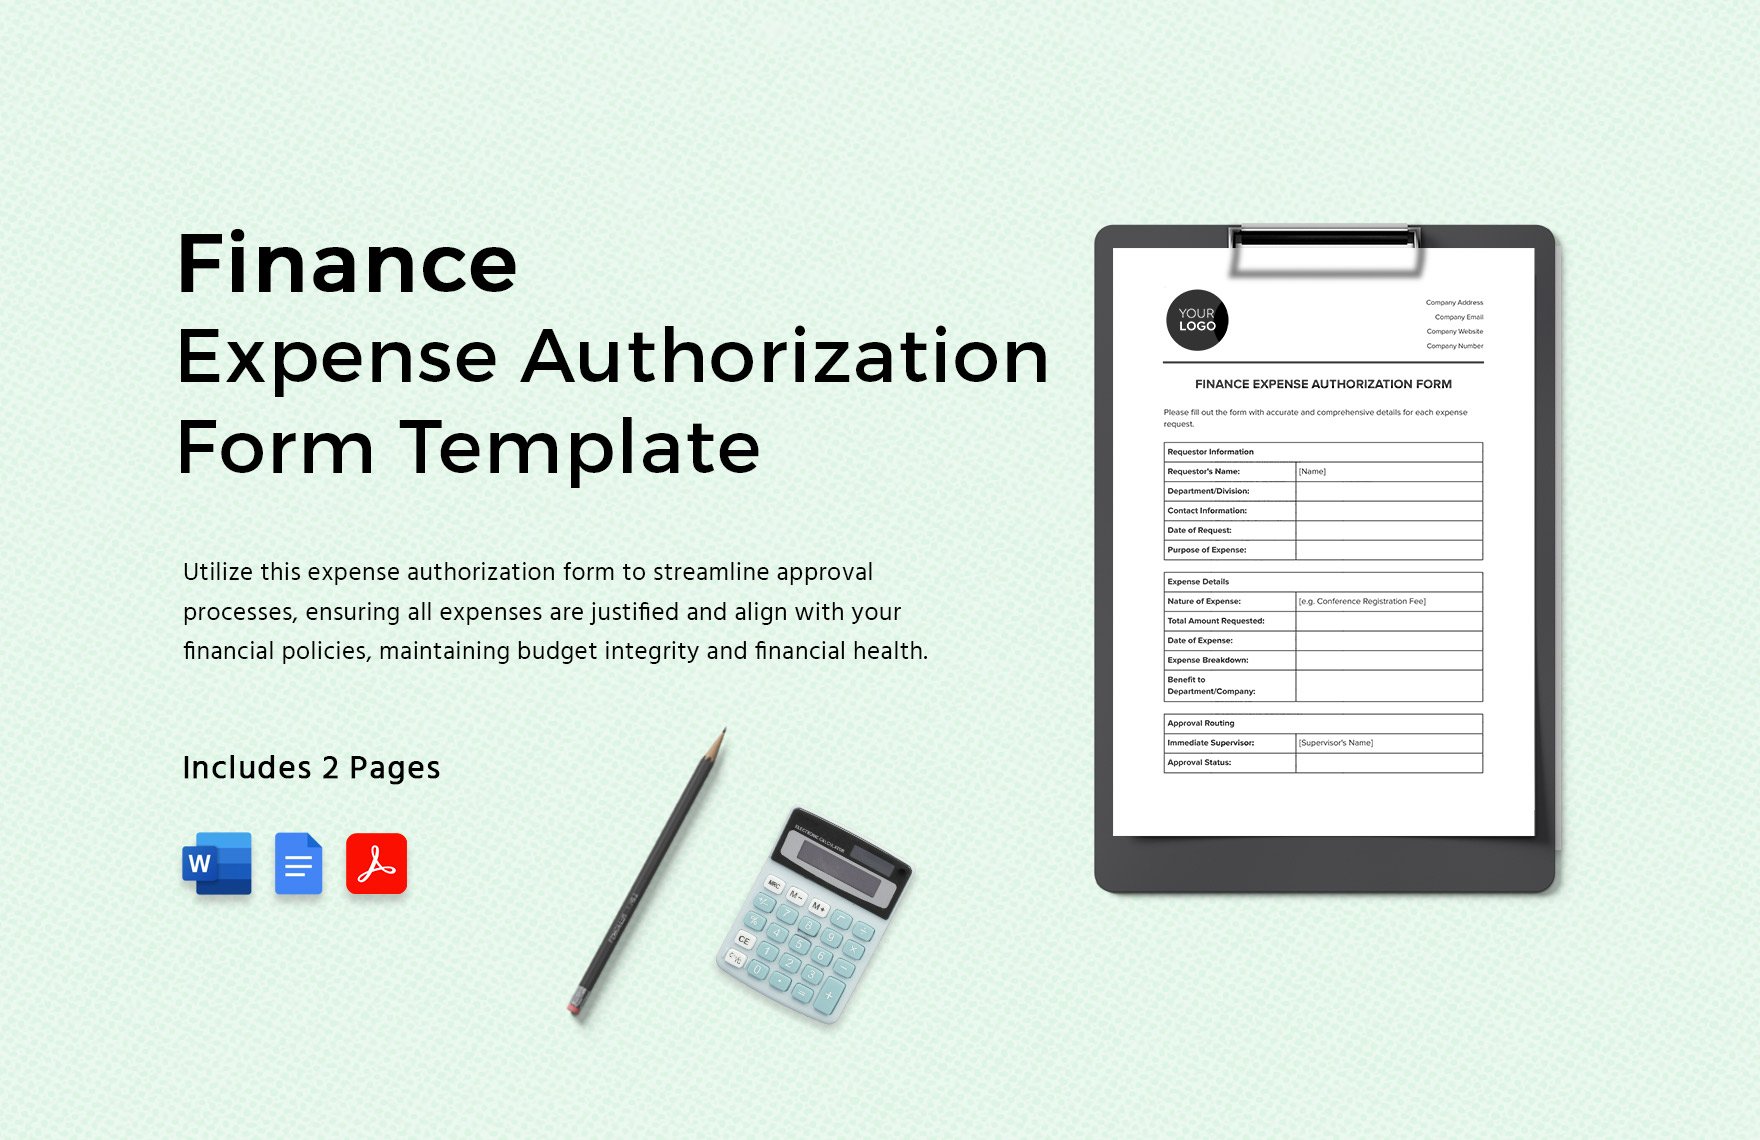 Finance Expense Authorization Form Template